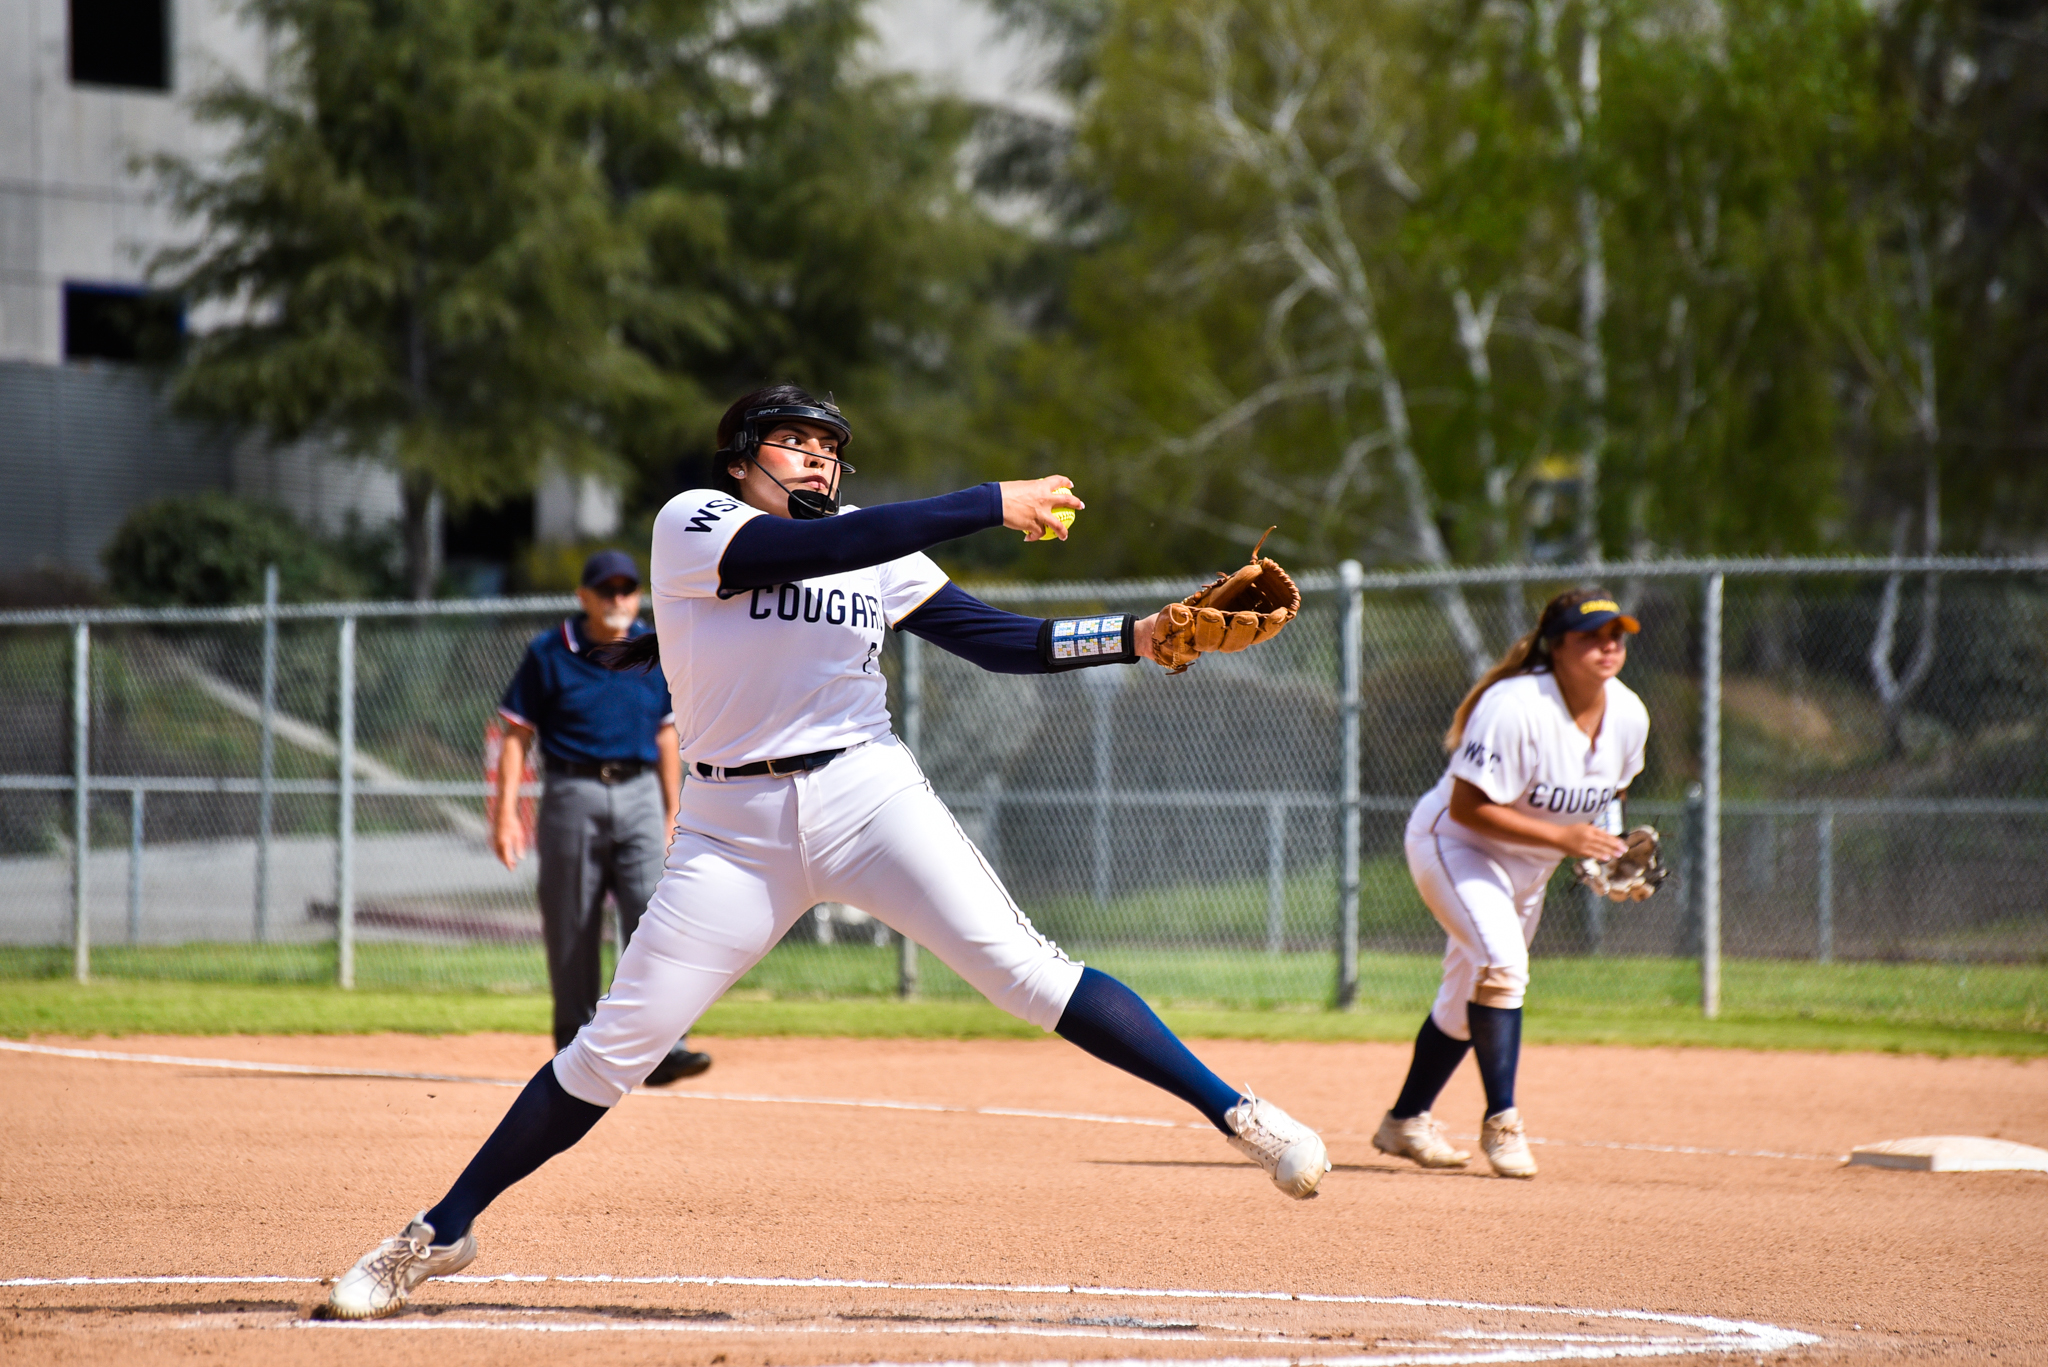 College of the Canyons softball image of Lexy Angulo vs. Long Beach City College on April 14, 2023.